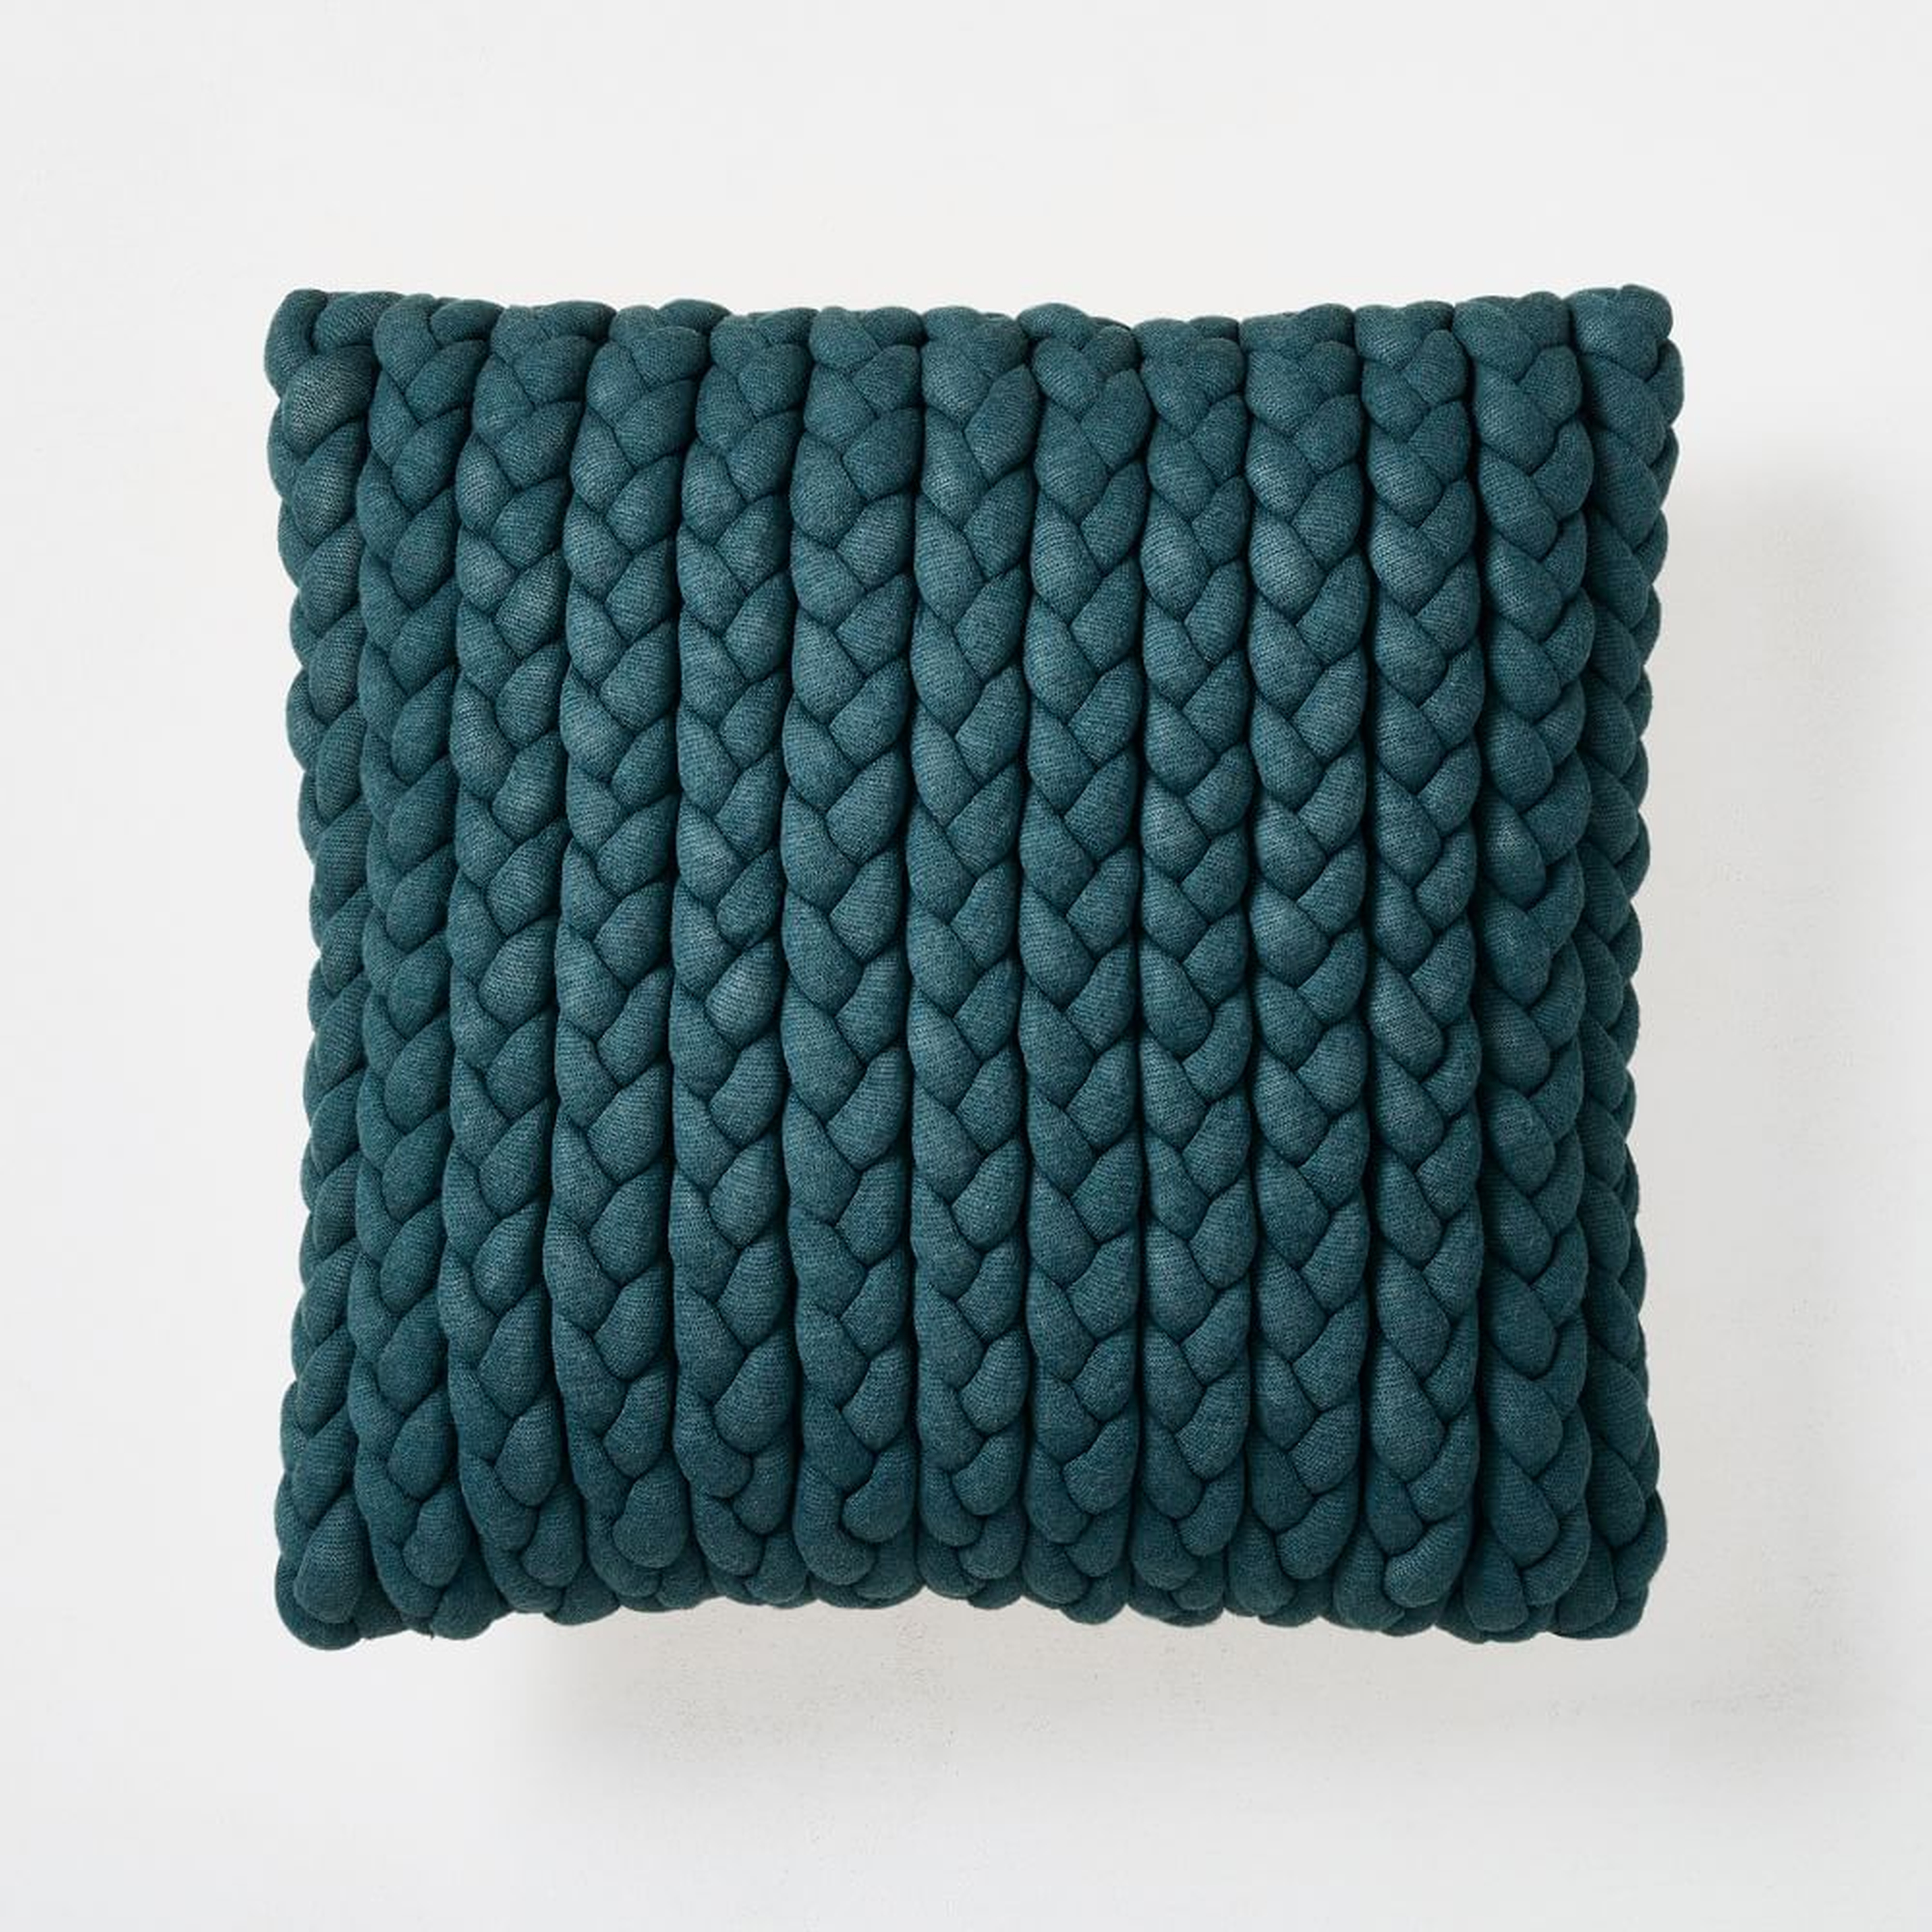 Braided Jersey Pillow Cover, Petrol, 20"x20", Set of 2 - West Elm